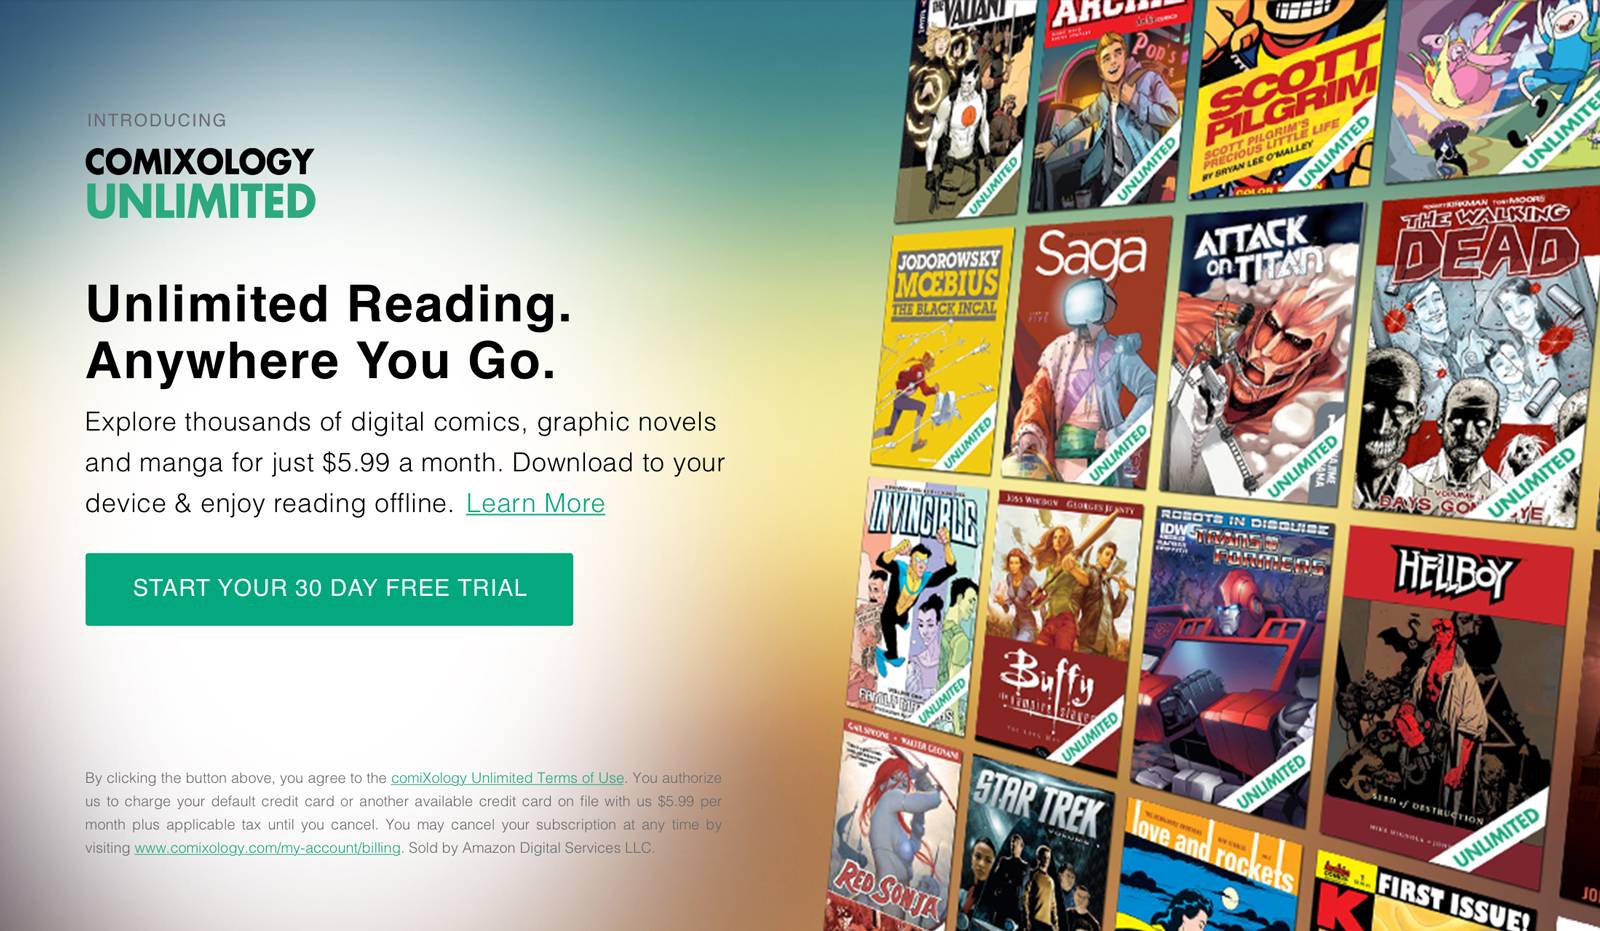 comixology unlimited free trial